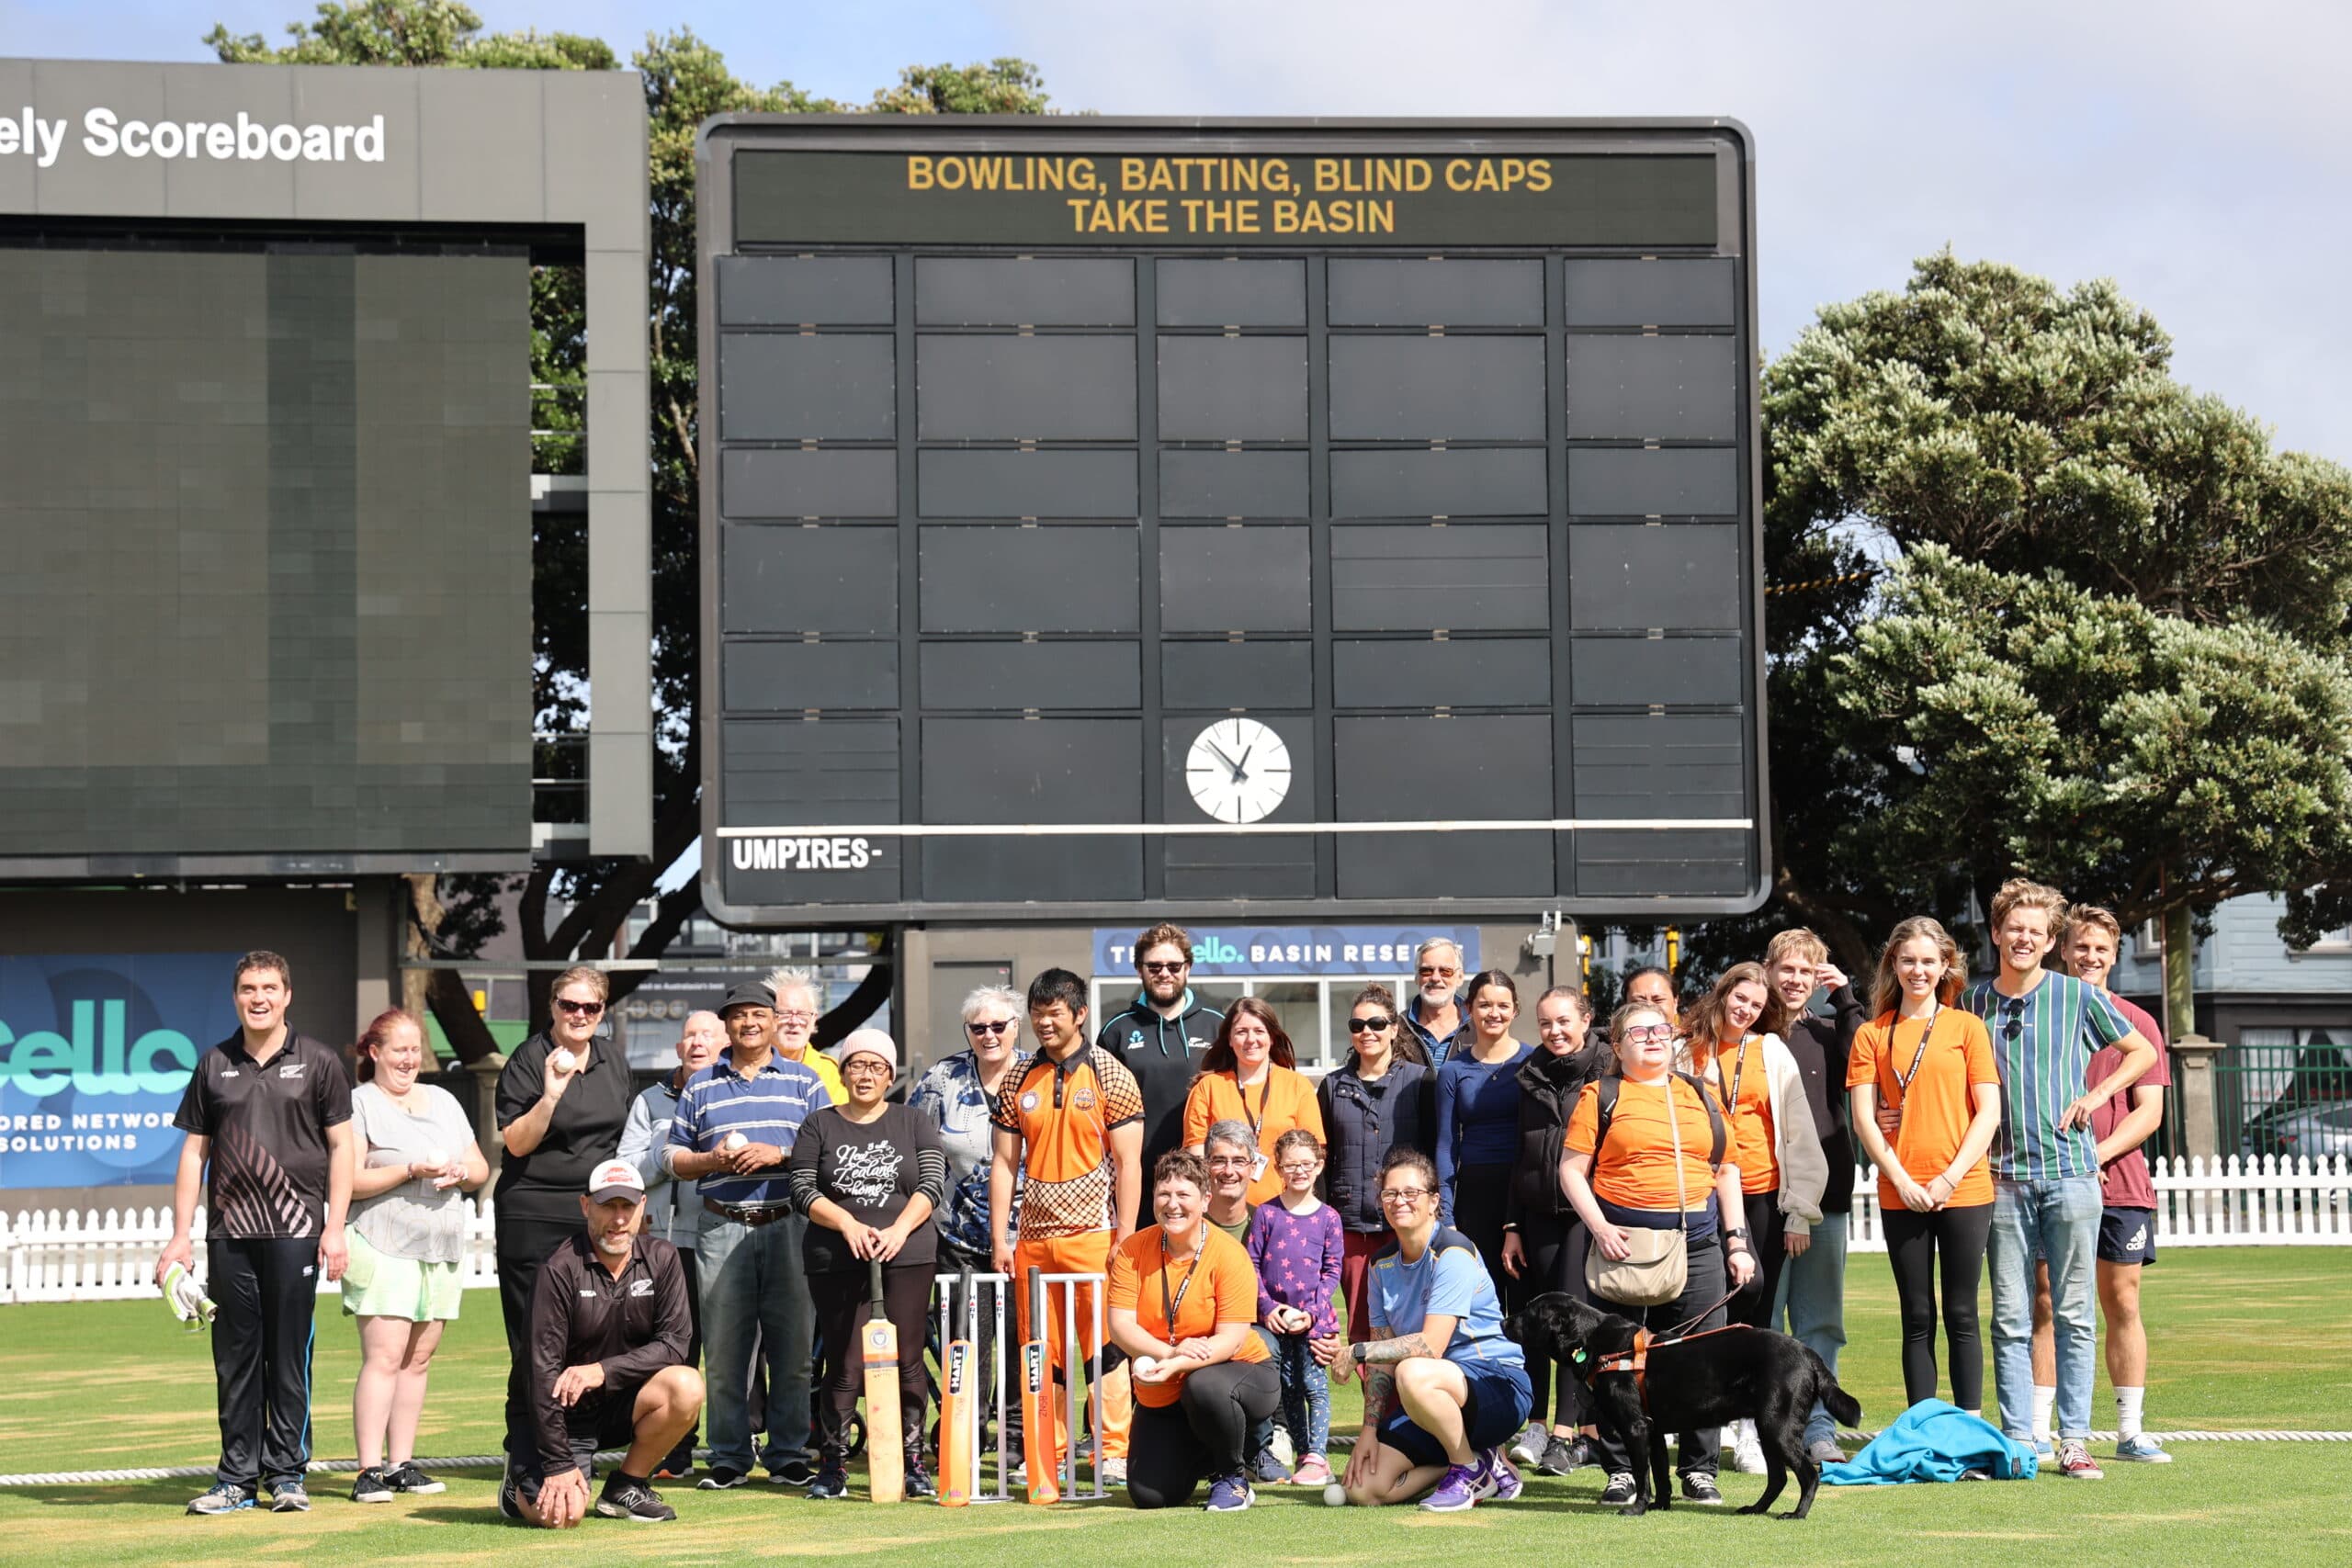 A group of Blind Low Vision NZ members, friends, family and staff standing in front of the Basin Reserve scoreboard that reads “ Bowling, Batting, Blind Caps Take the Basin”. It's a sunny day even though a few clouds appear in the background.